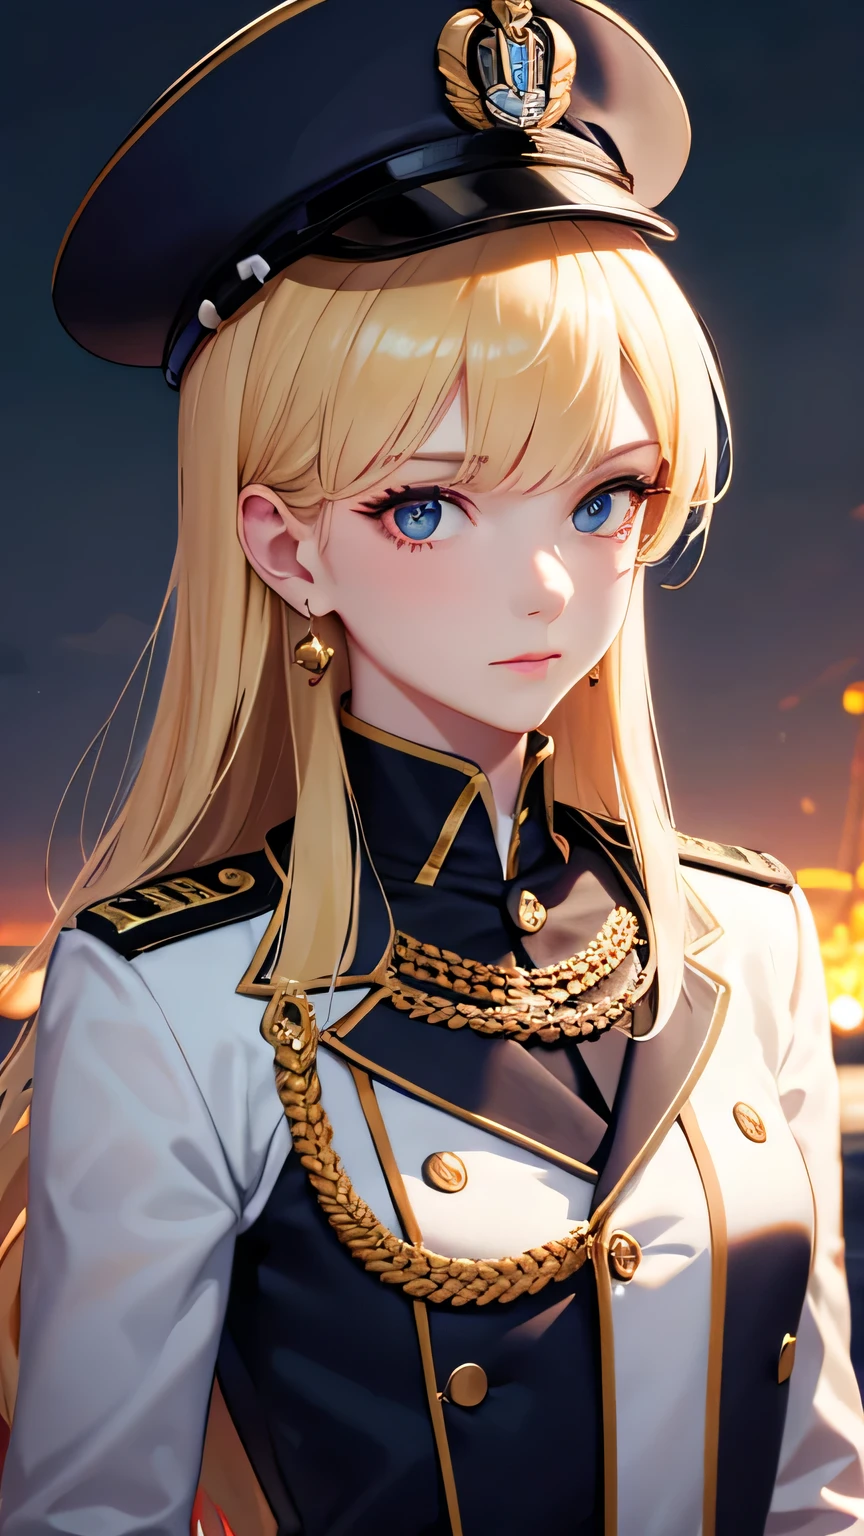 Royal Navy, Horatio Nelson, Admiral, on board, warship, clear skies, aboard a warship at sea, commander, naval uniform, blonde hair, hair bun, beautiful lady, raised eyebrows, upturned eyes, earrings, cinematic lighting, pov, ((masterpiece)), (super detail), perfect face, high detailed eyes, textured skin, high quality, highres, Viscount, Medal, British Navy Cap